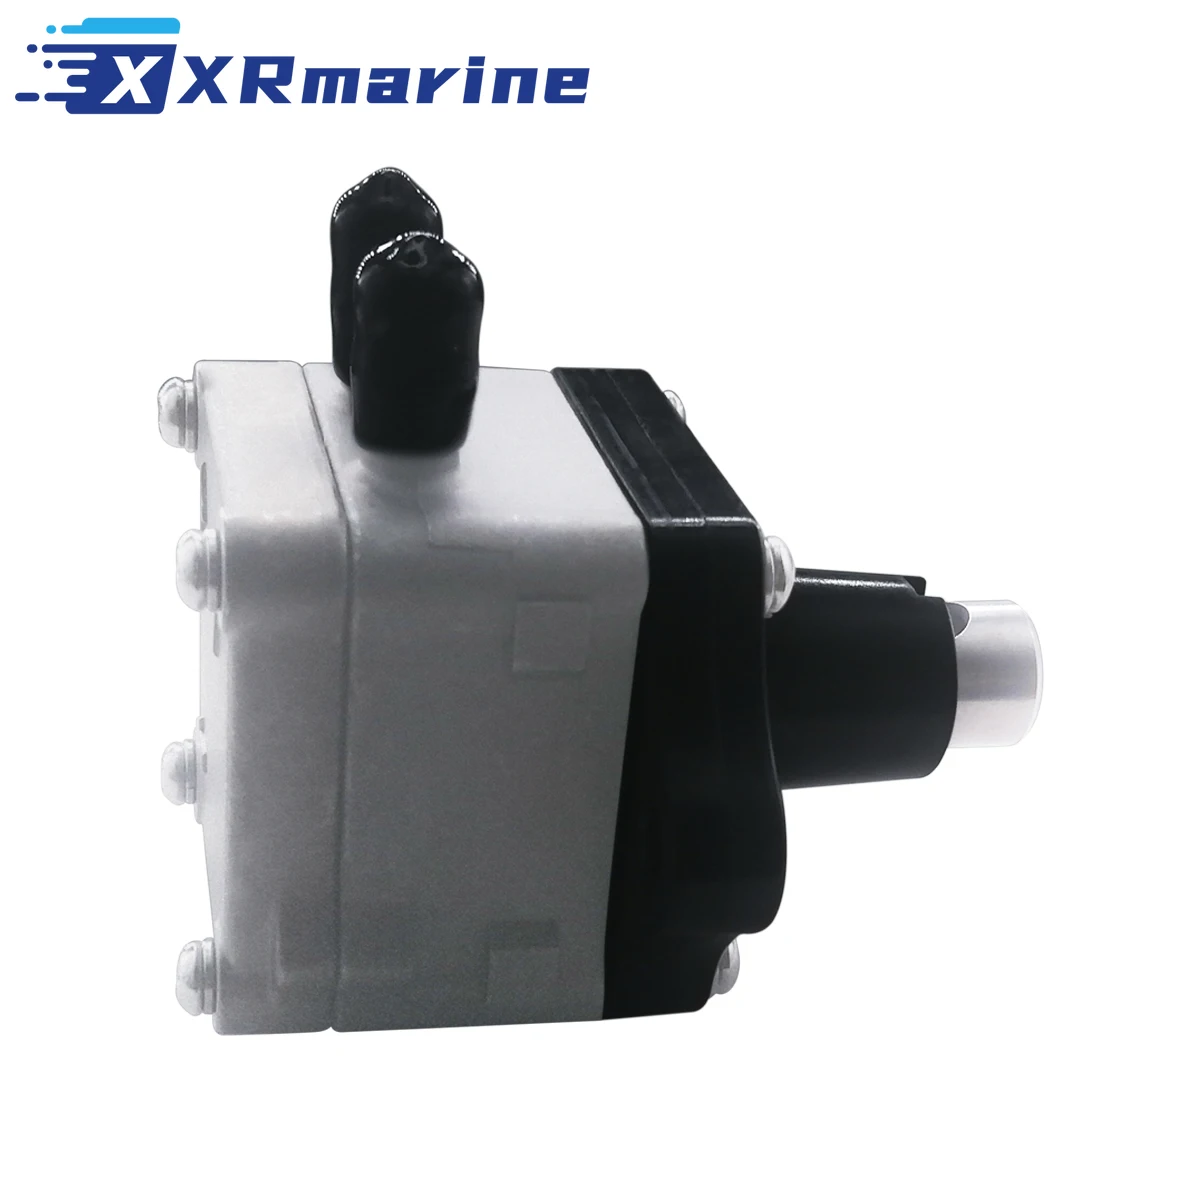 Fuel Pump 16700-ZV5-003 16700-ZW1-004 for Honda Outboard Boat Engine BF25 BF30 BF40 BF50 BF75 BF90 25HP-90HP